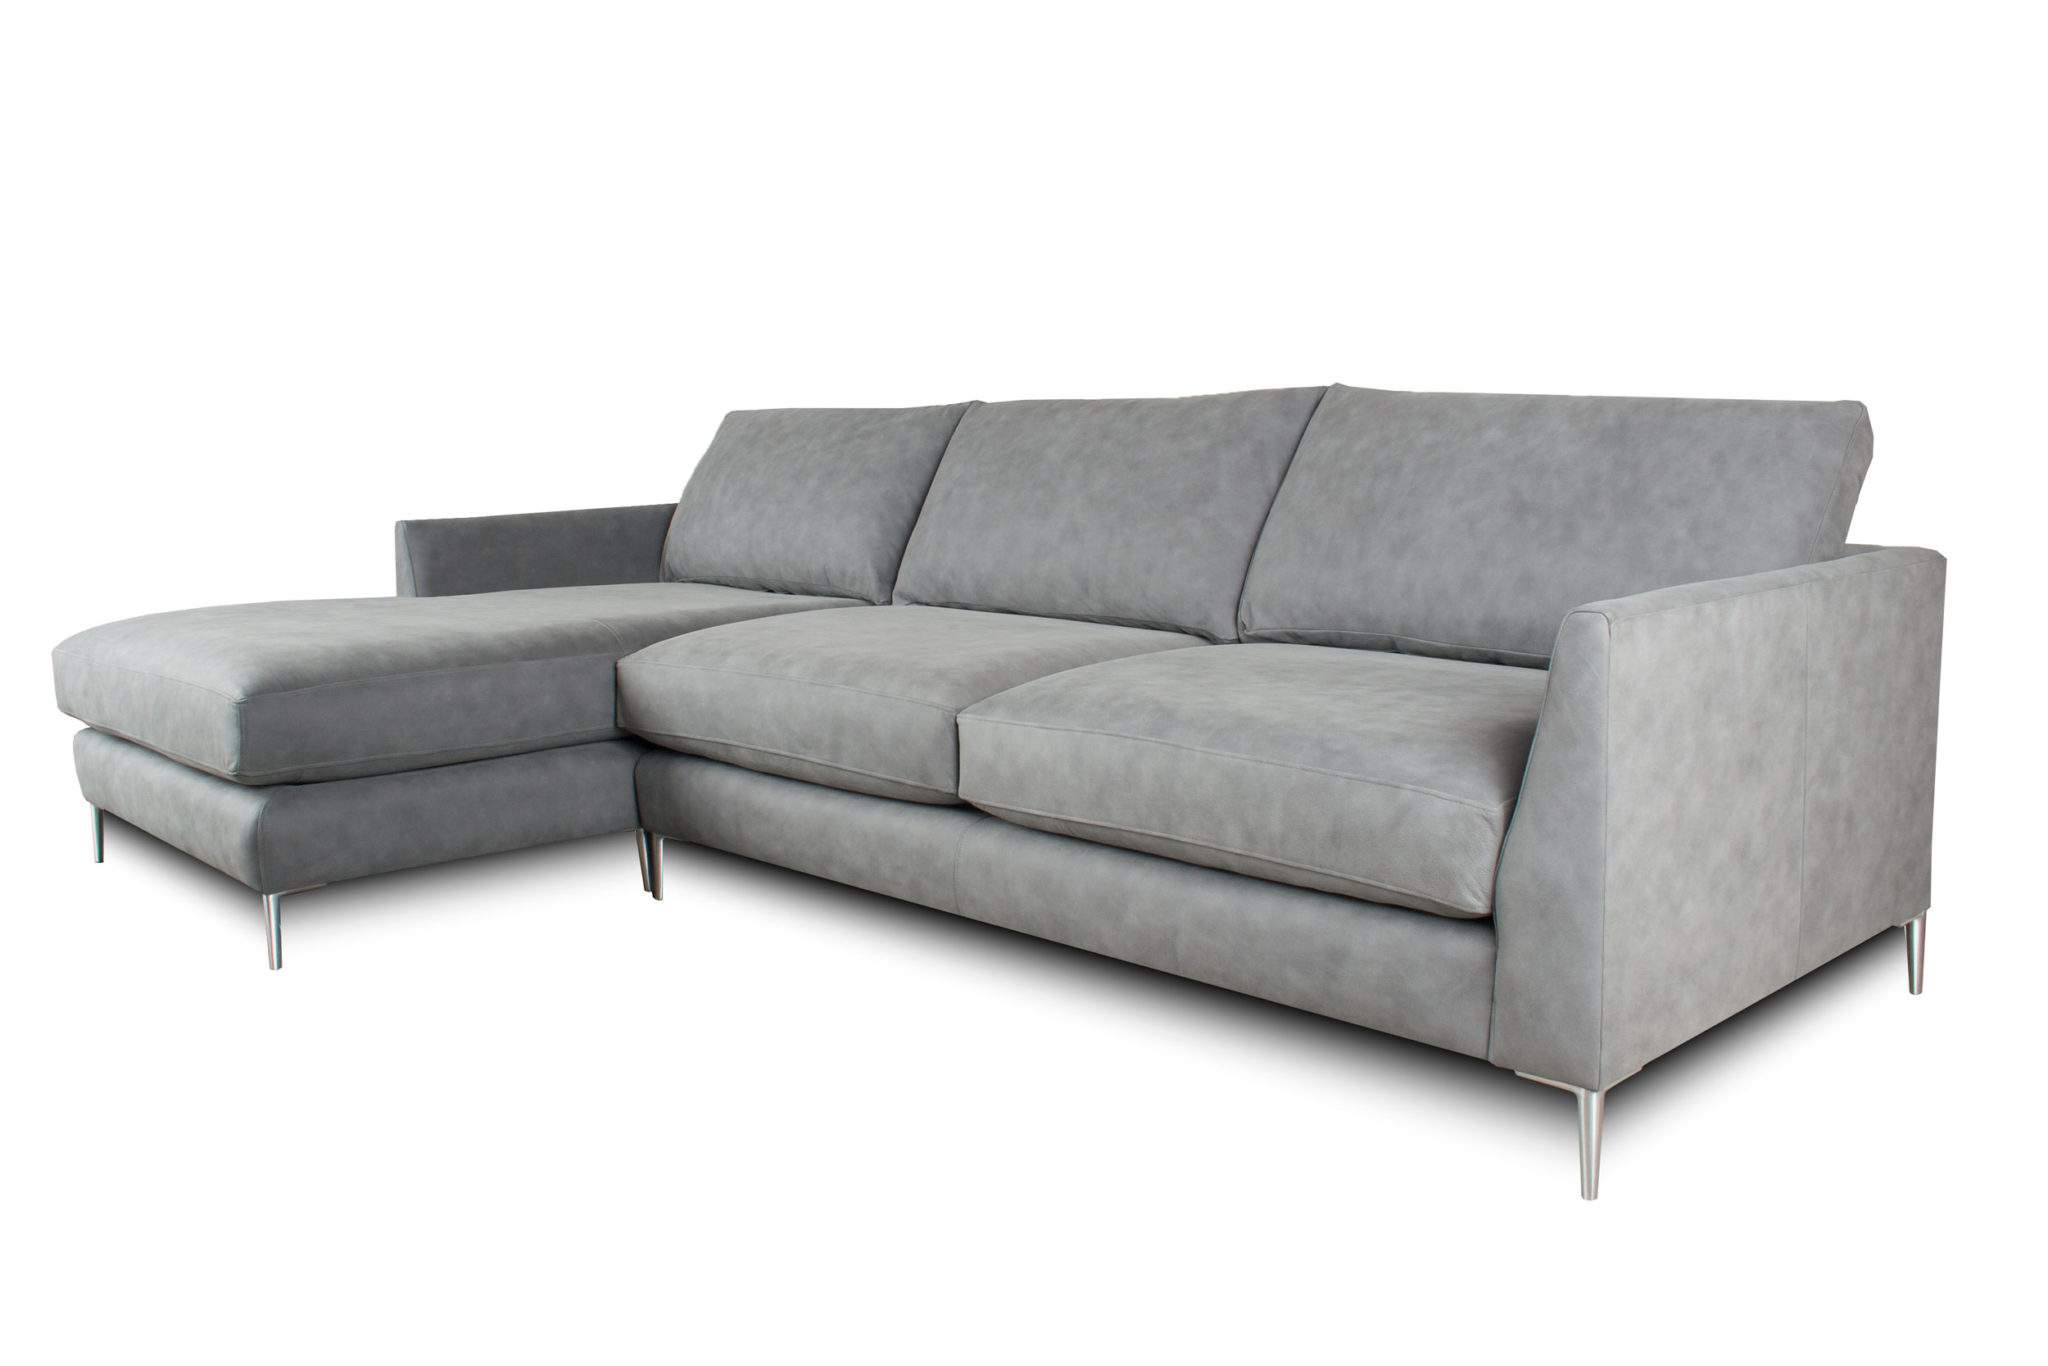 Grey Leather Sofa - Lucca Style - Angled